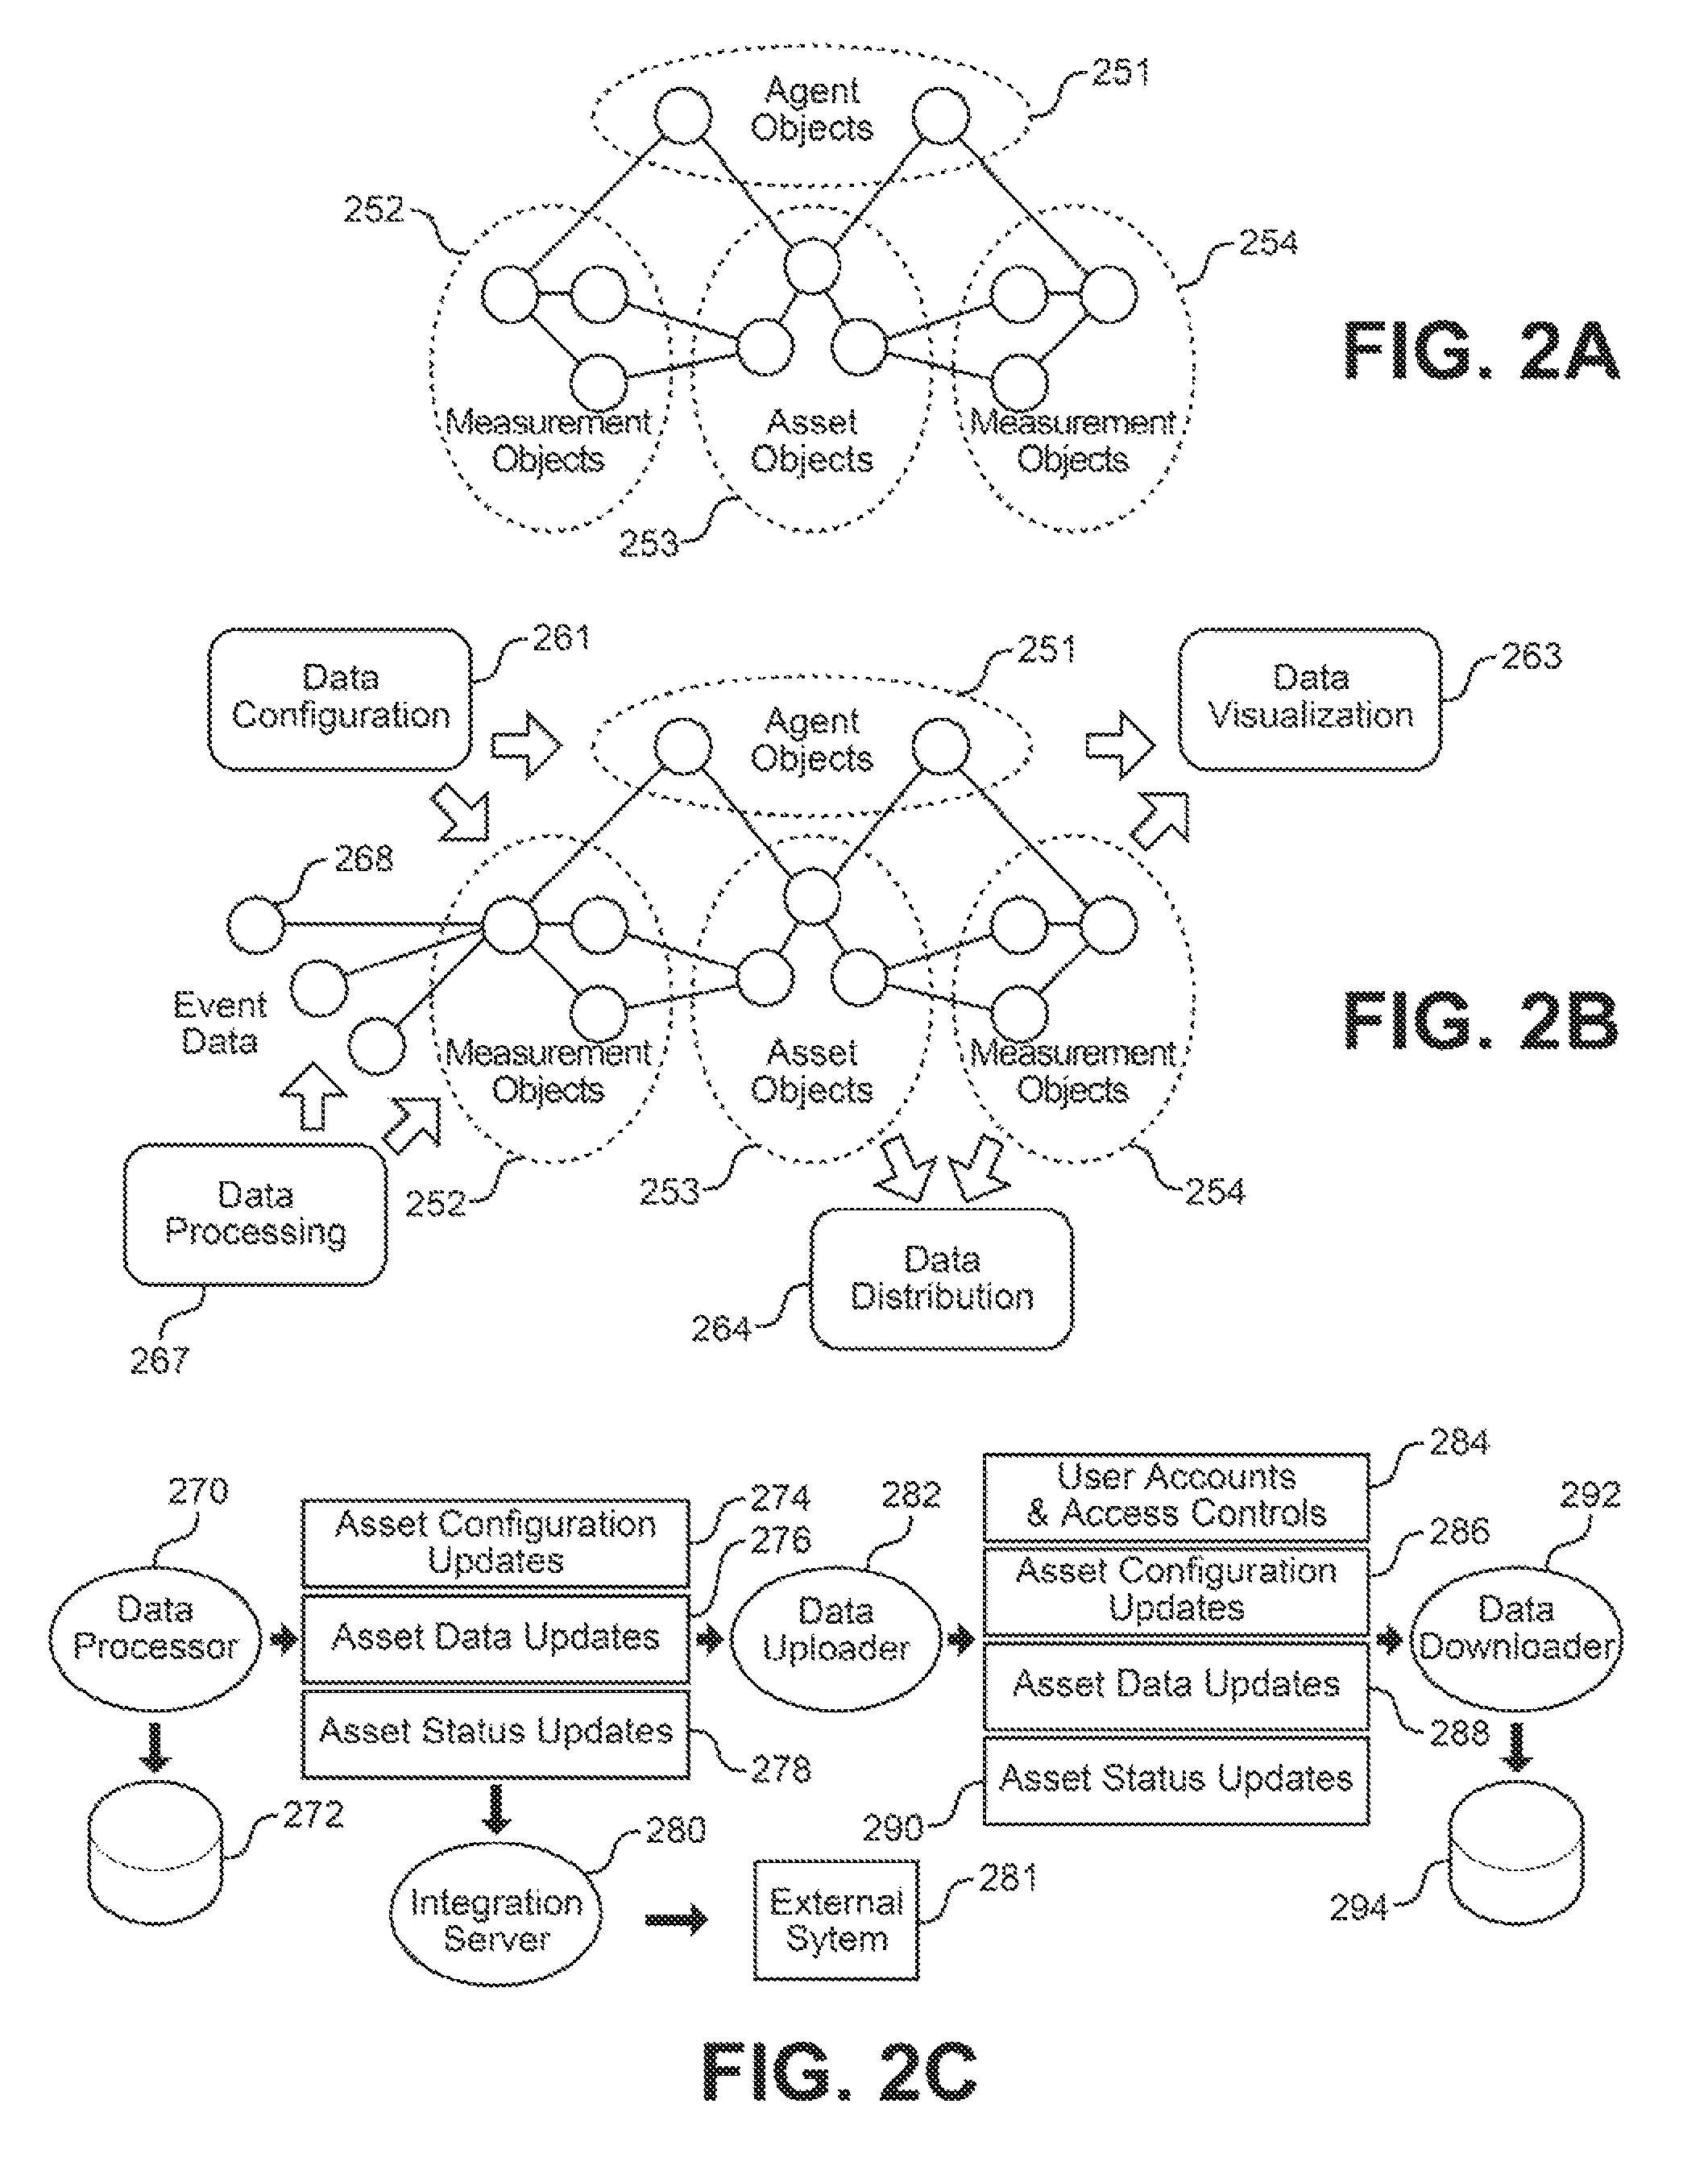 Method and system for monitoring and reporting equipment operating conditions and diagnostic information